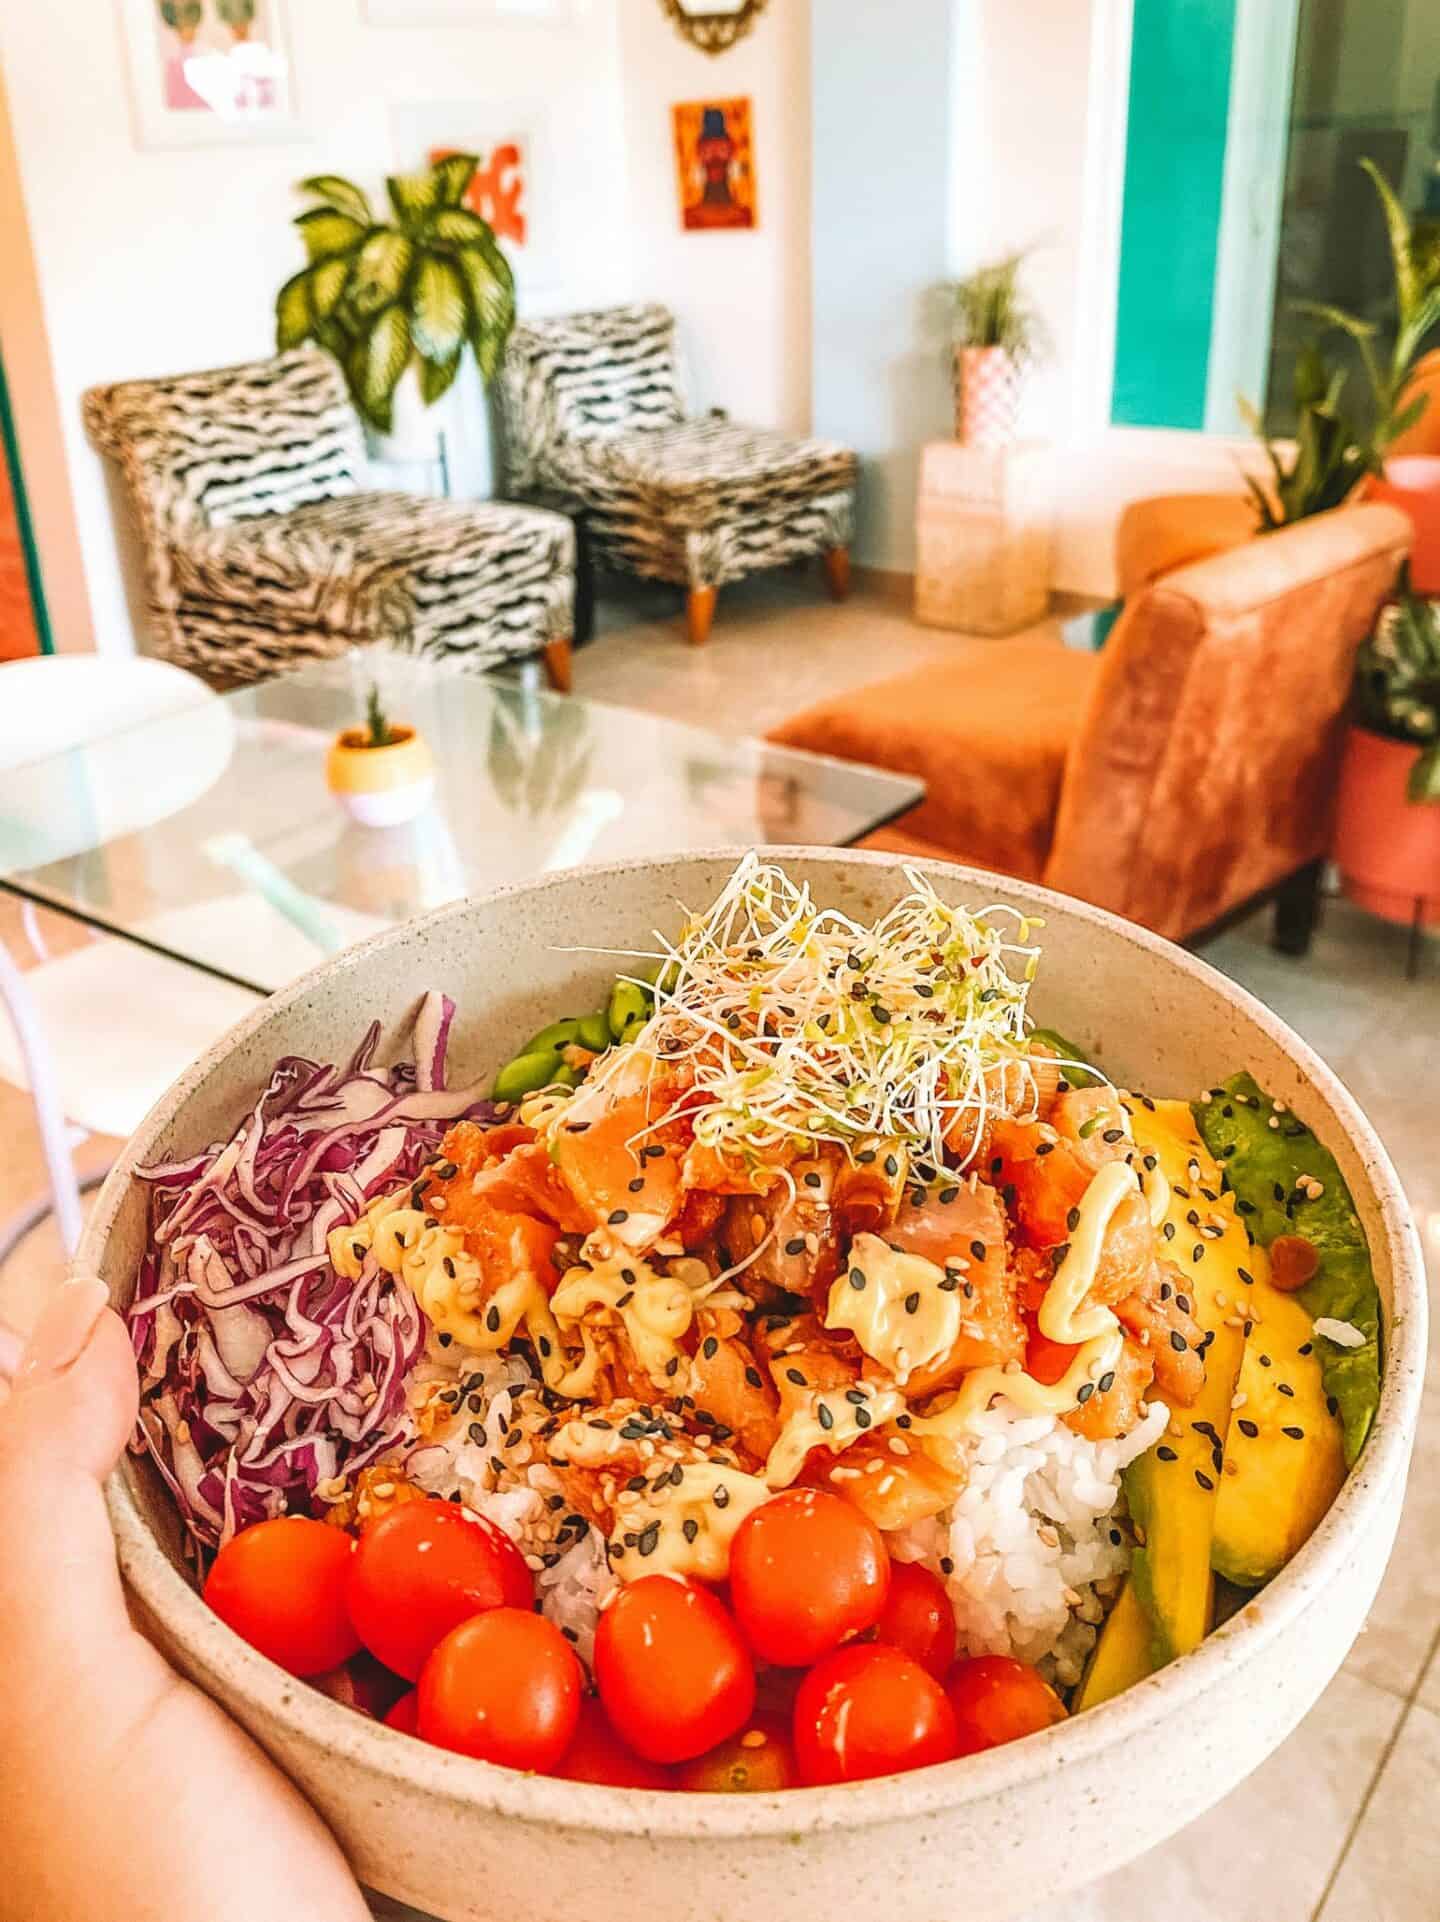 Another poke bowl from Crisp showing the trendy interior of the restaurant